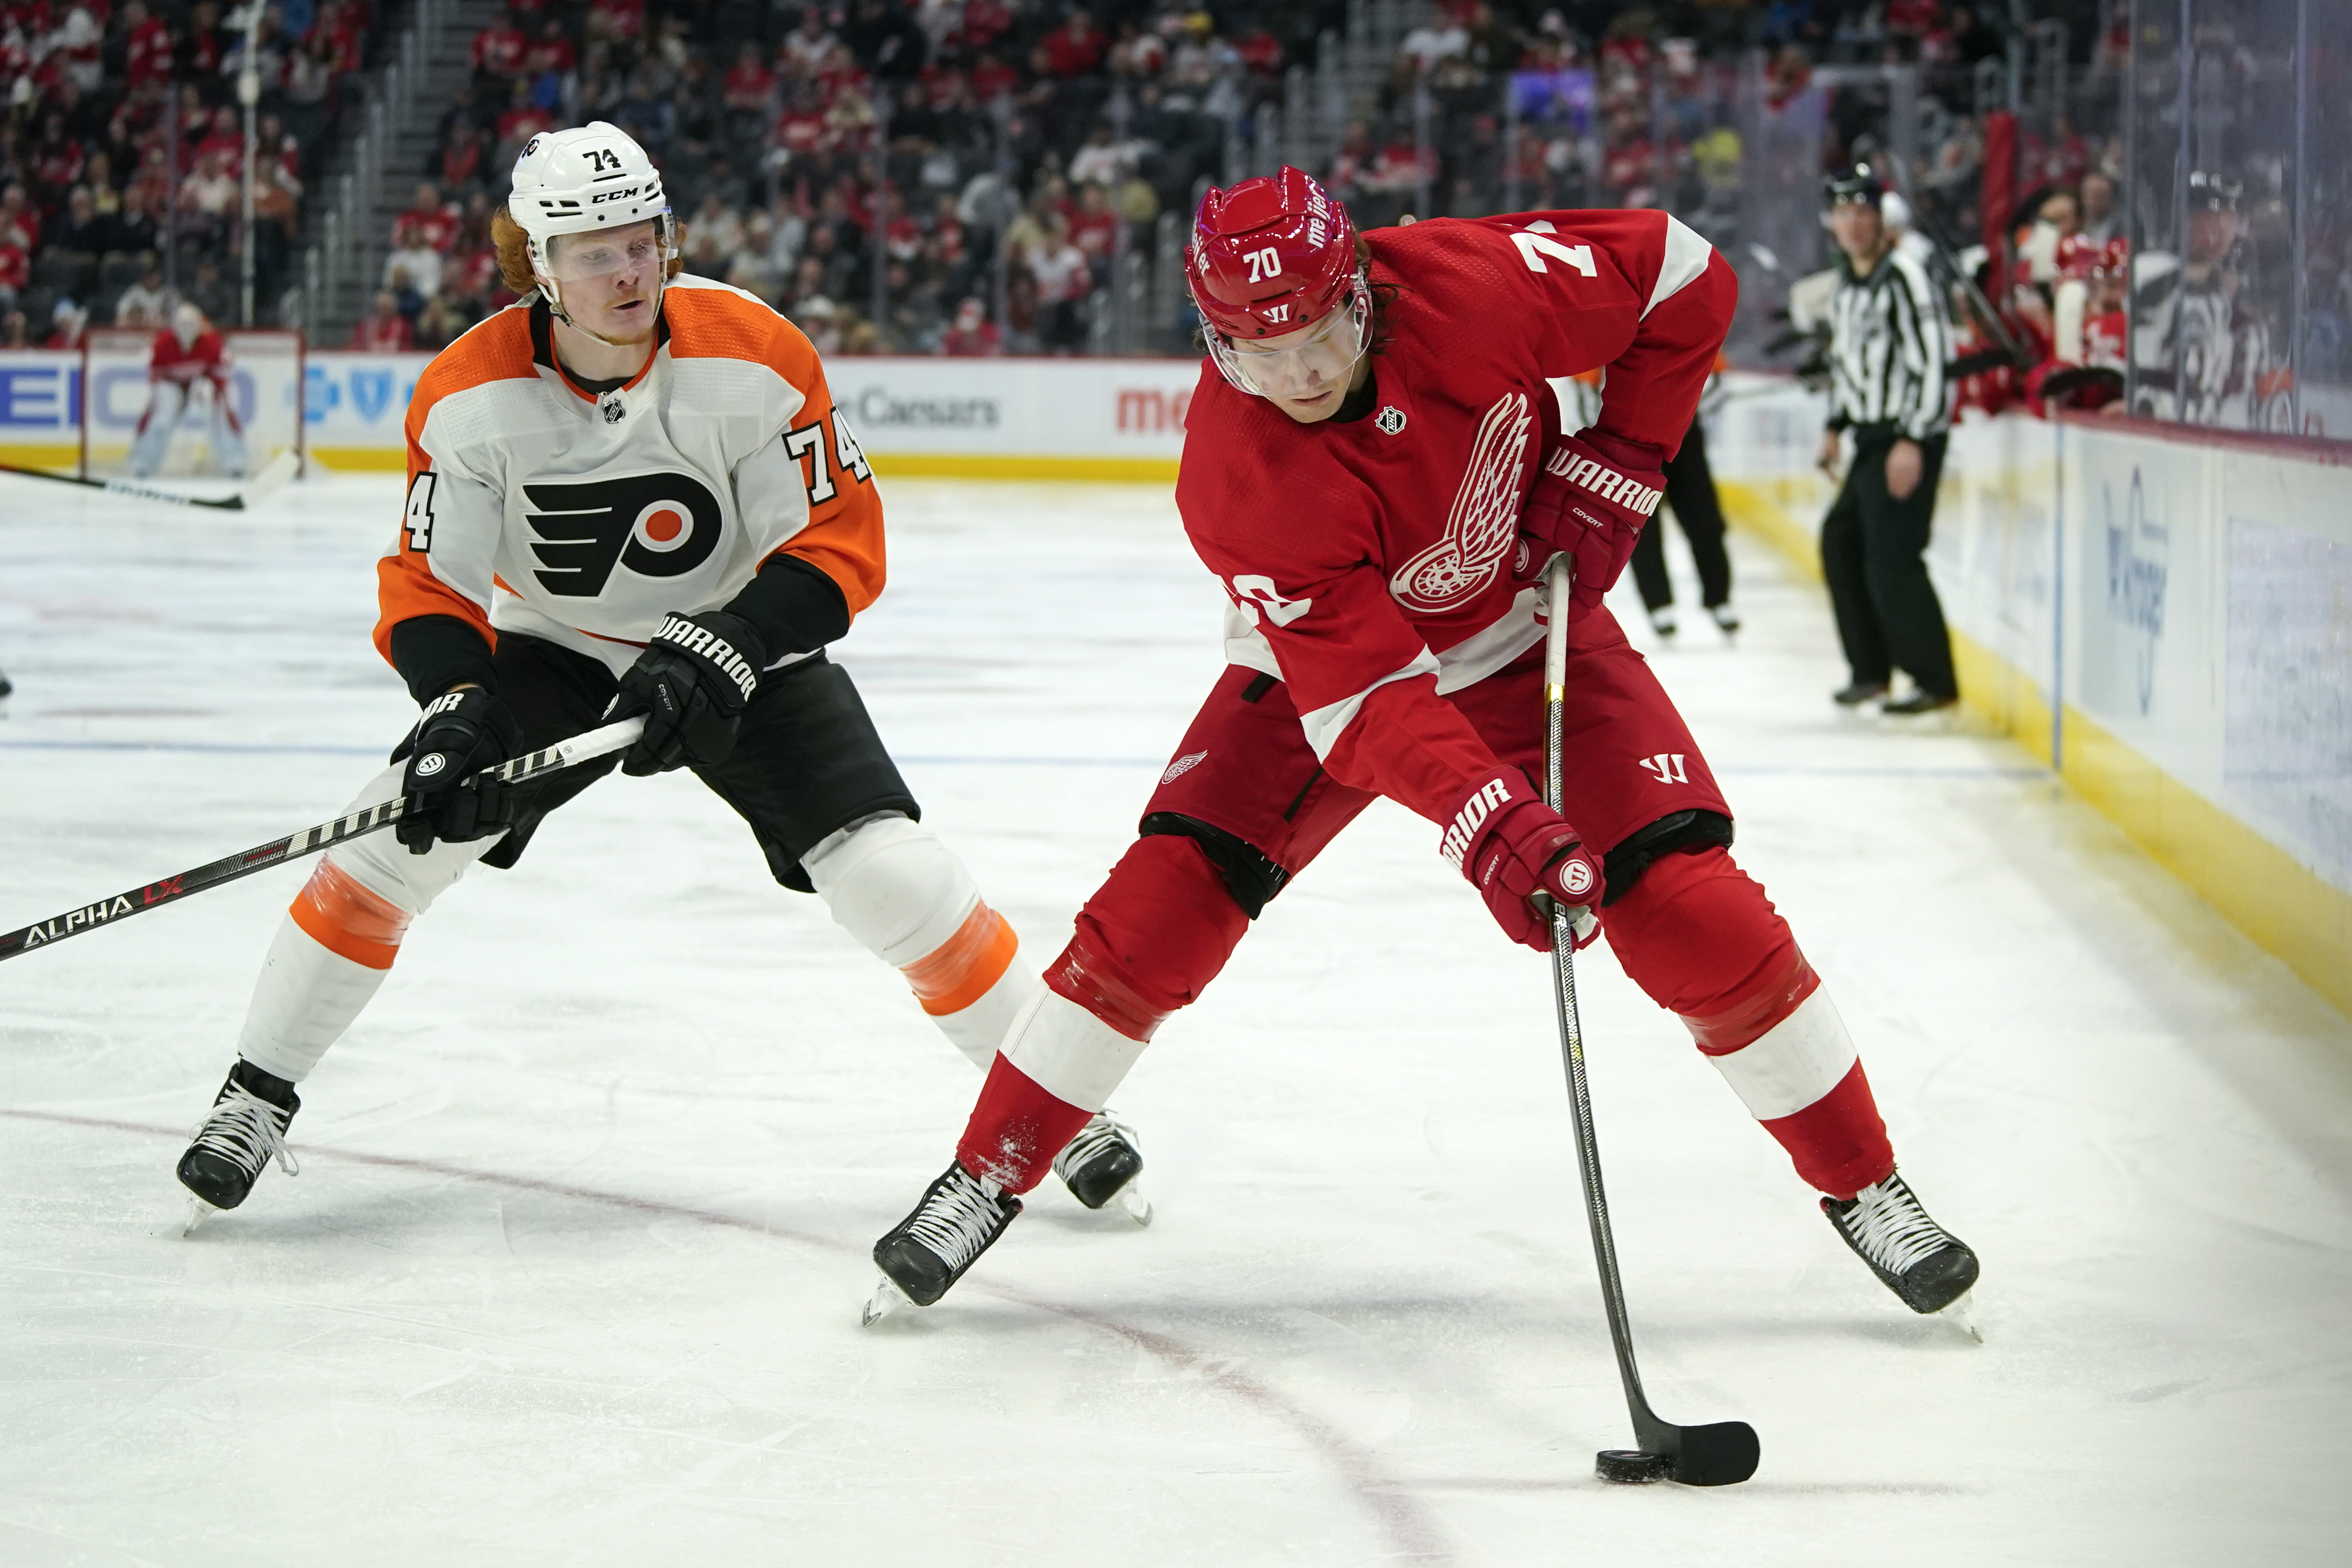 Red Wings downward trend continues in 3-0 loss to Flyers – The Oakland Press